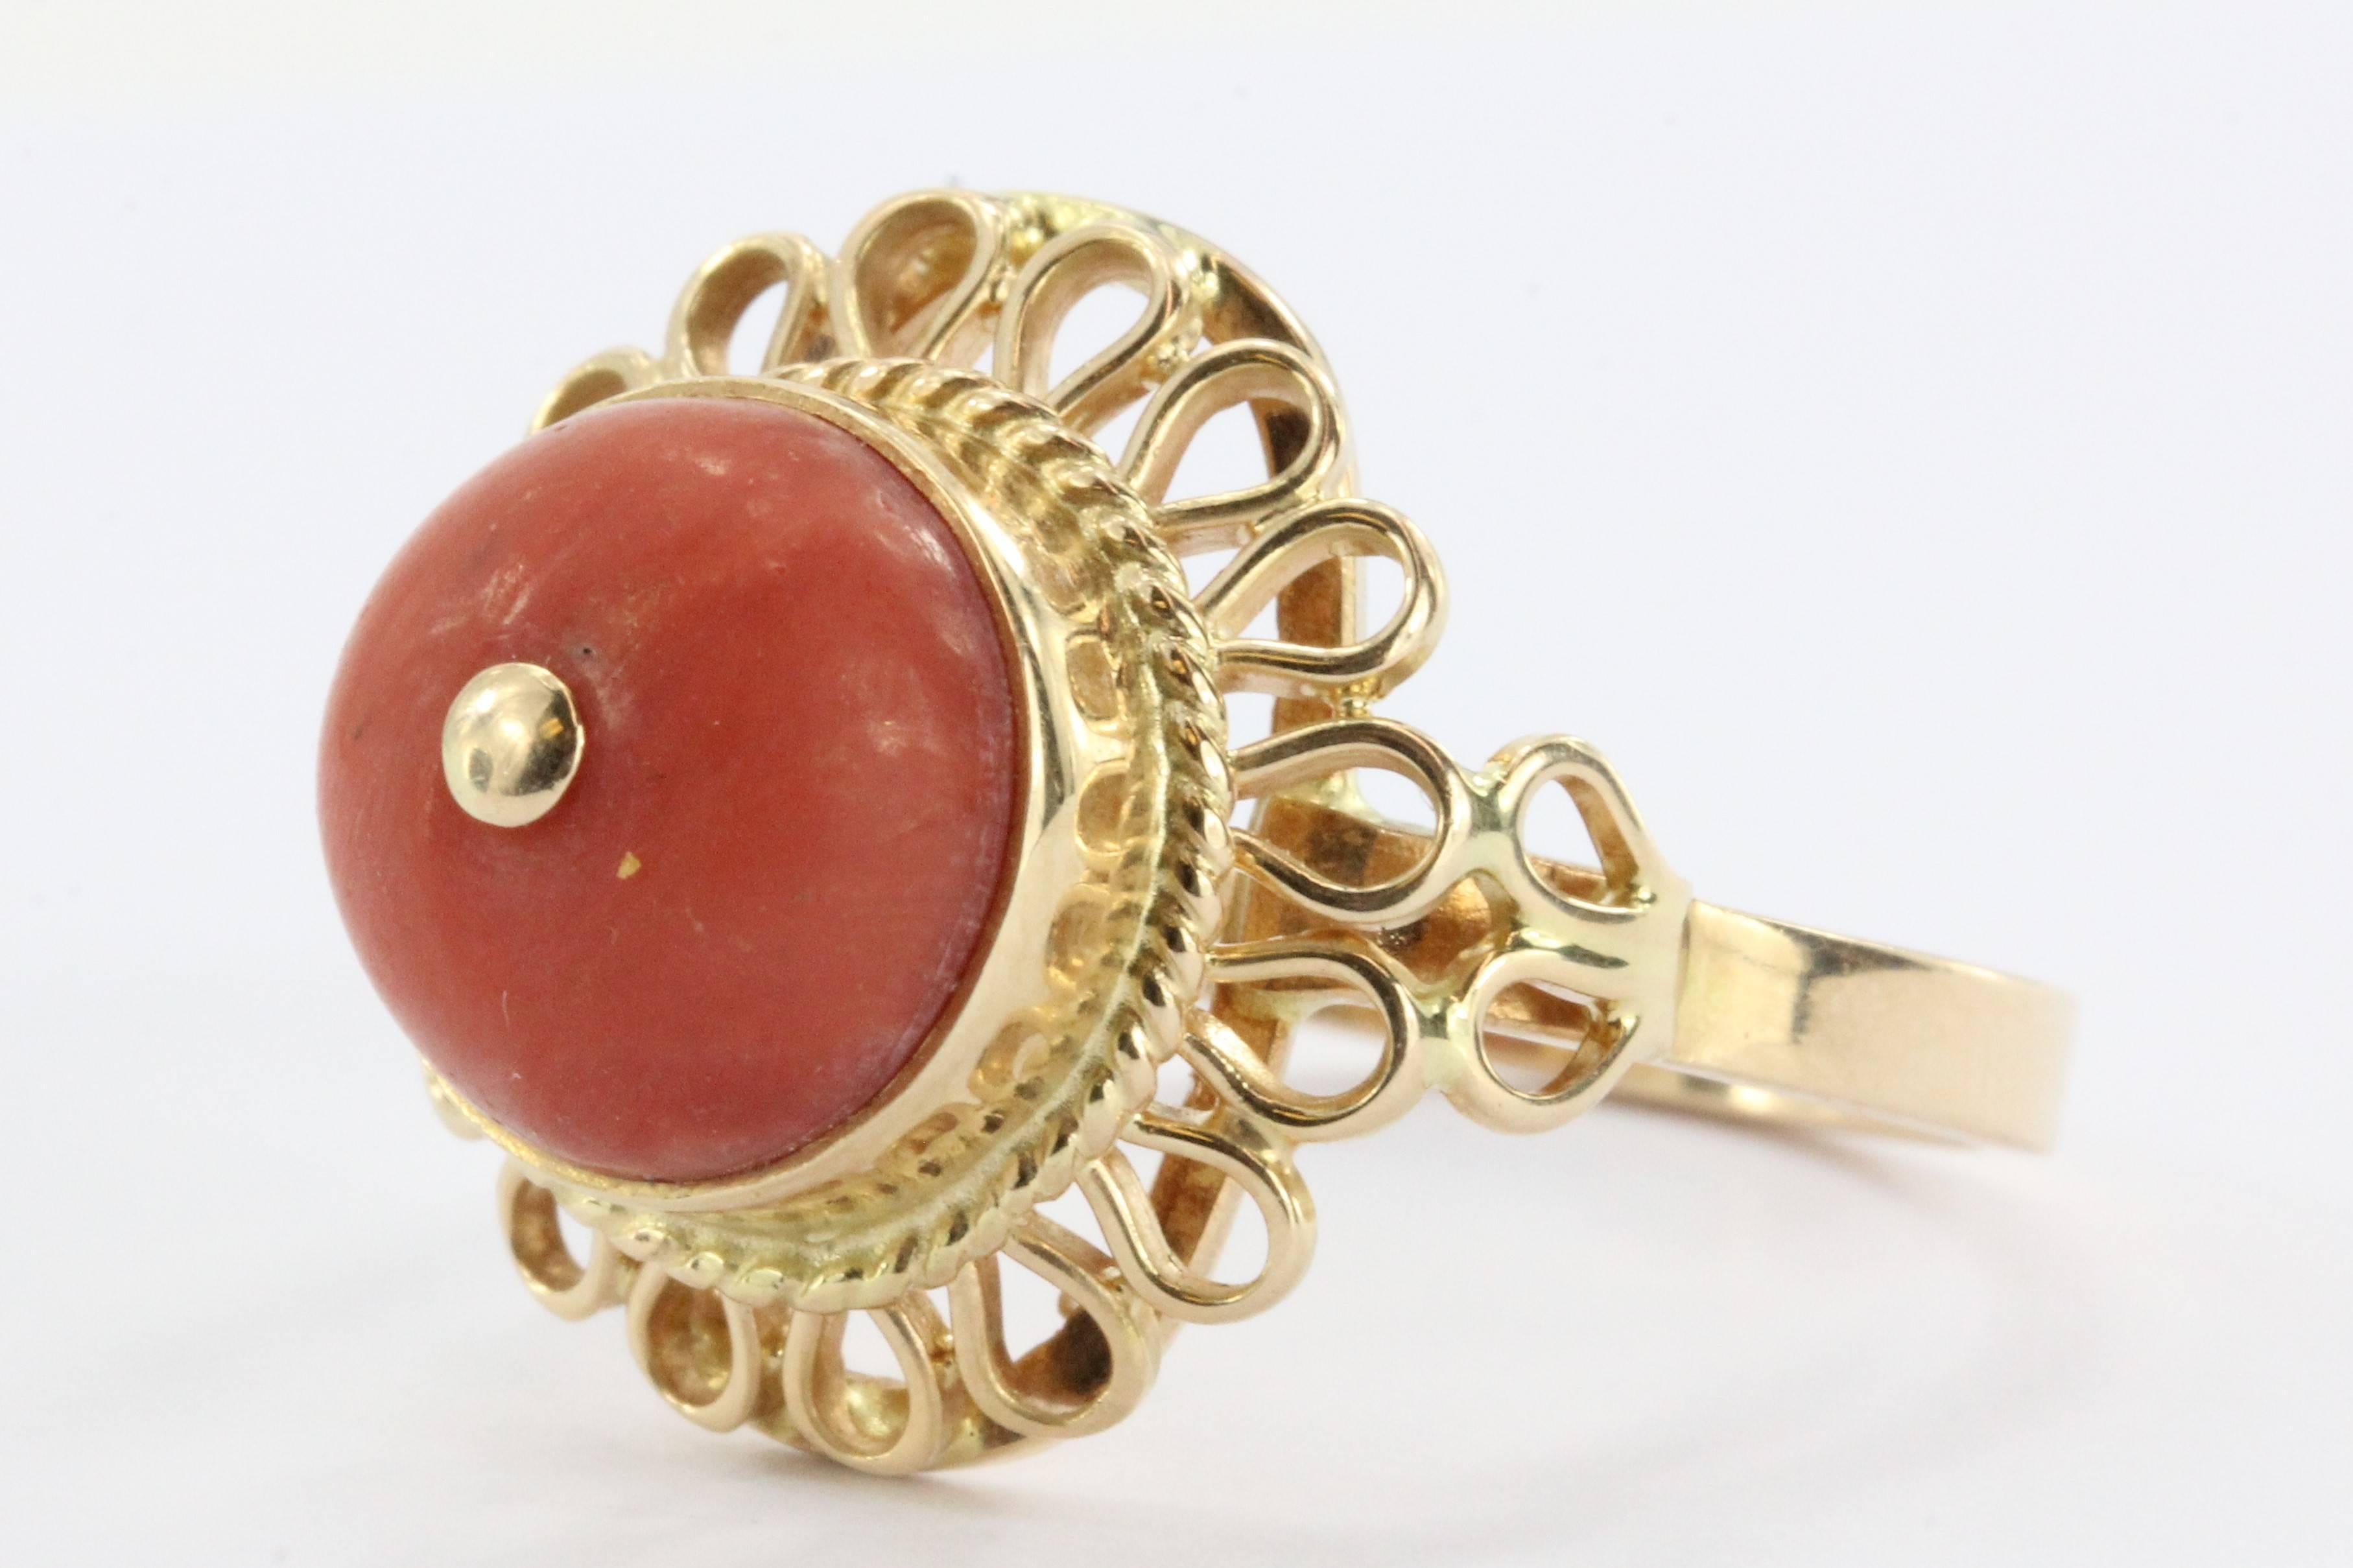 Antique Polish 14K Gold Red Coral Ring 1920 - 1931 Cracow Poland. The ring is in excellent estate condition and ready to wear. It is hallmarked with the Polish hallmarked used between 1920 - 1931. It has the 3 indicating 14K and a K for the city of